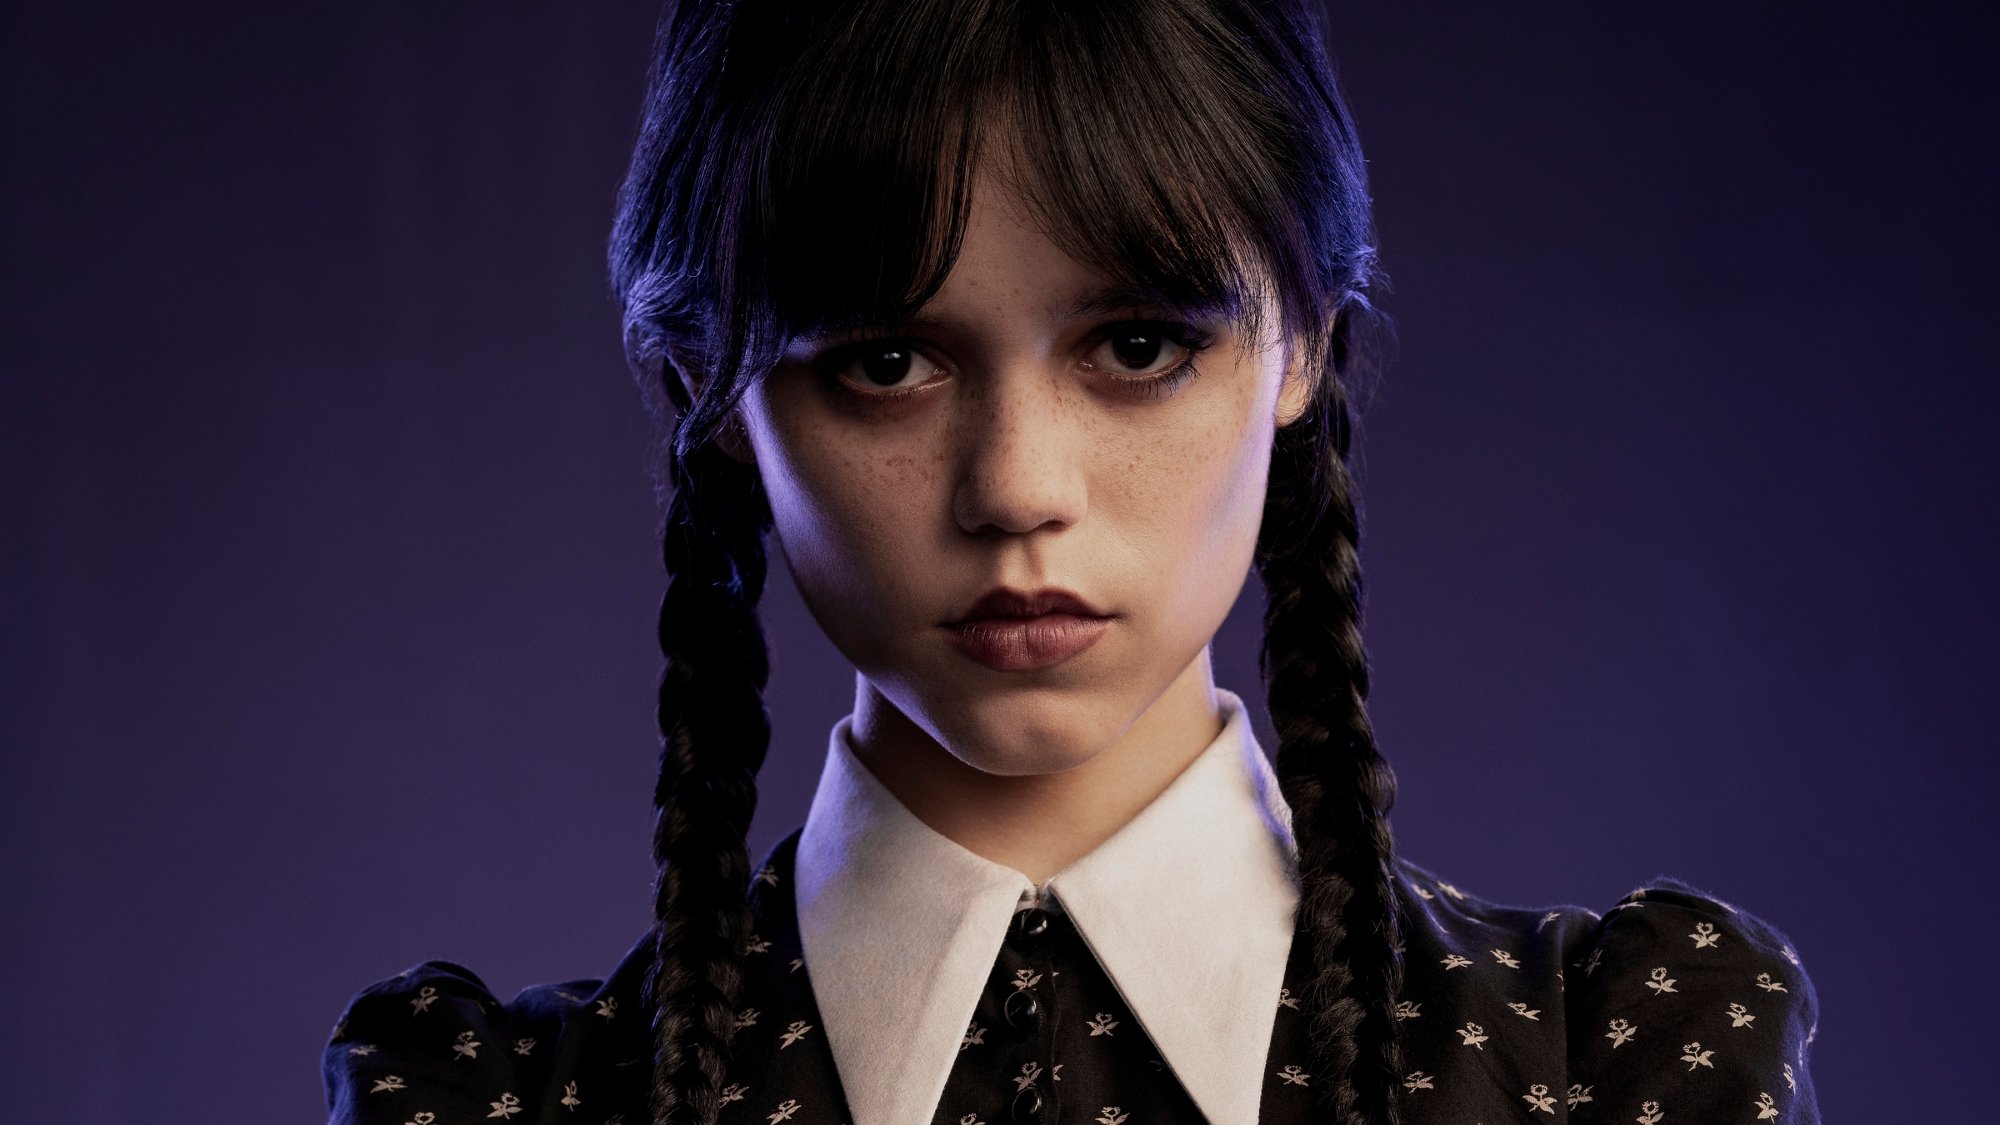 Wednesday Addams Inspired Outfits - Central Florida Chic